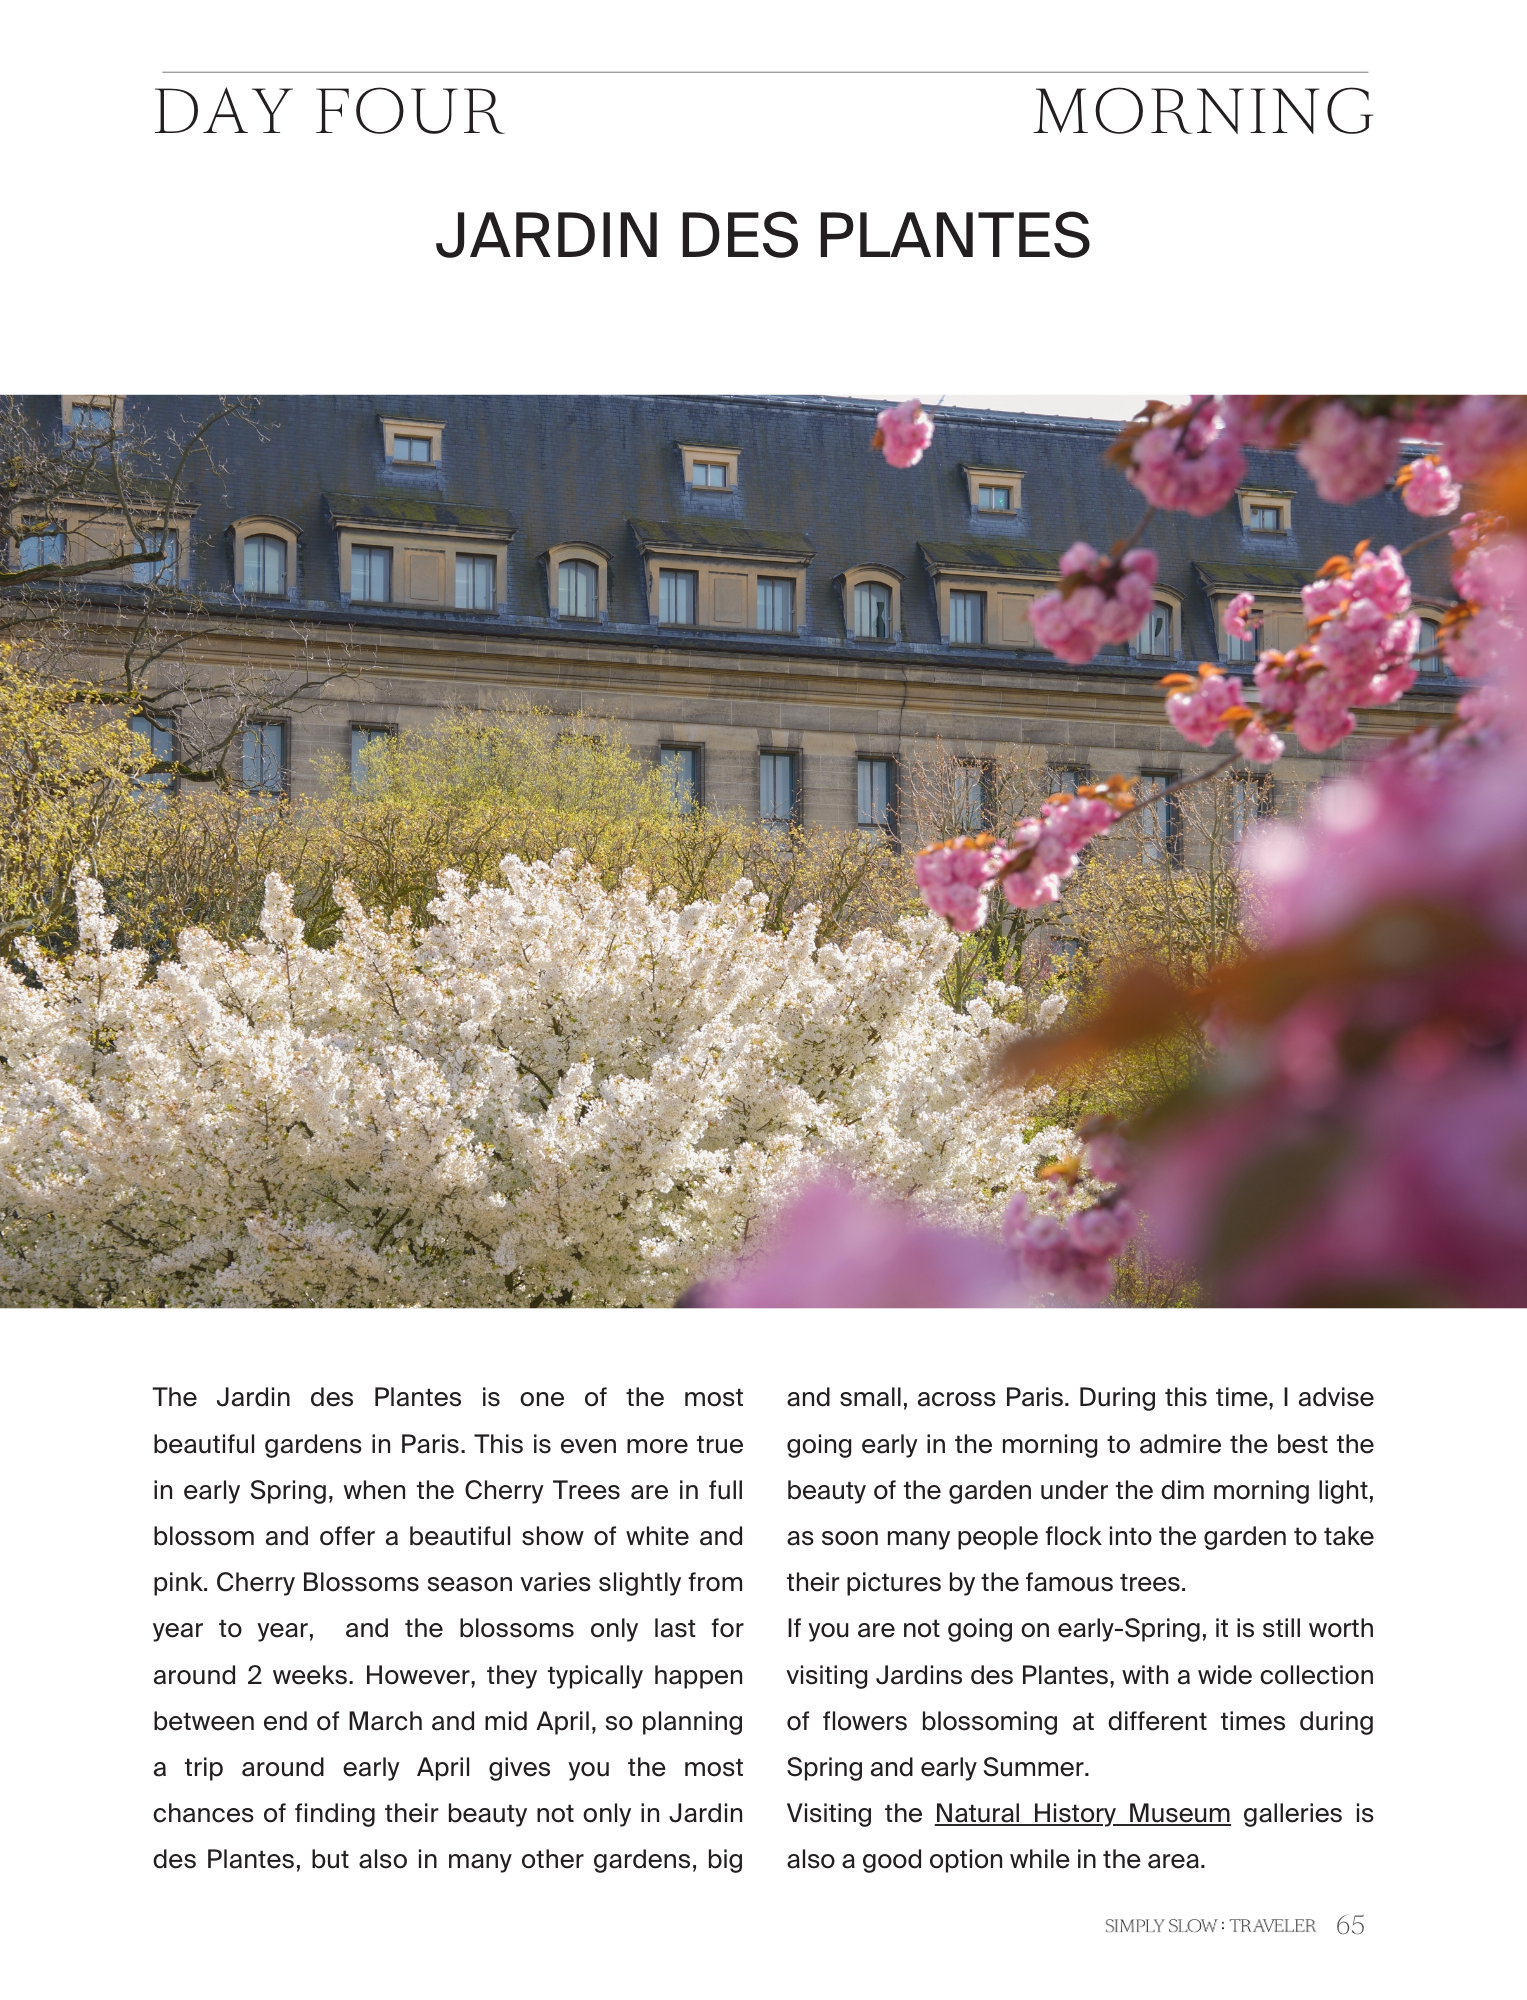 A Guide to Paris - Page on the Jardin des Plantes, by Simply Slow Traveler